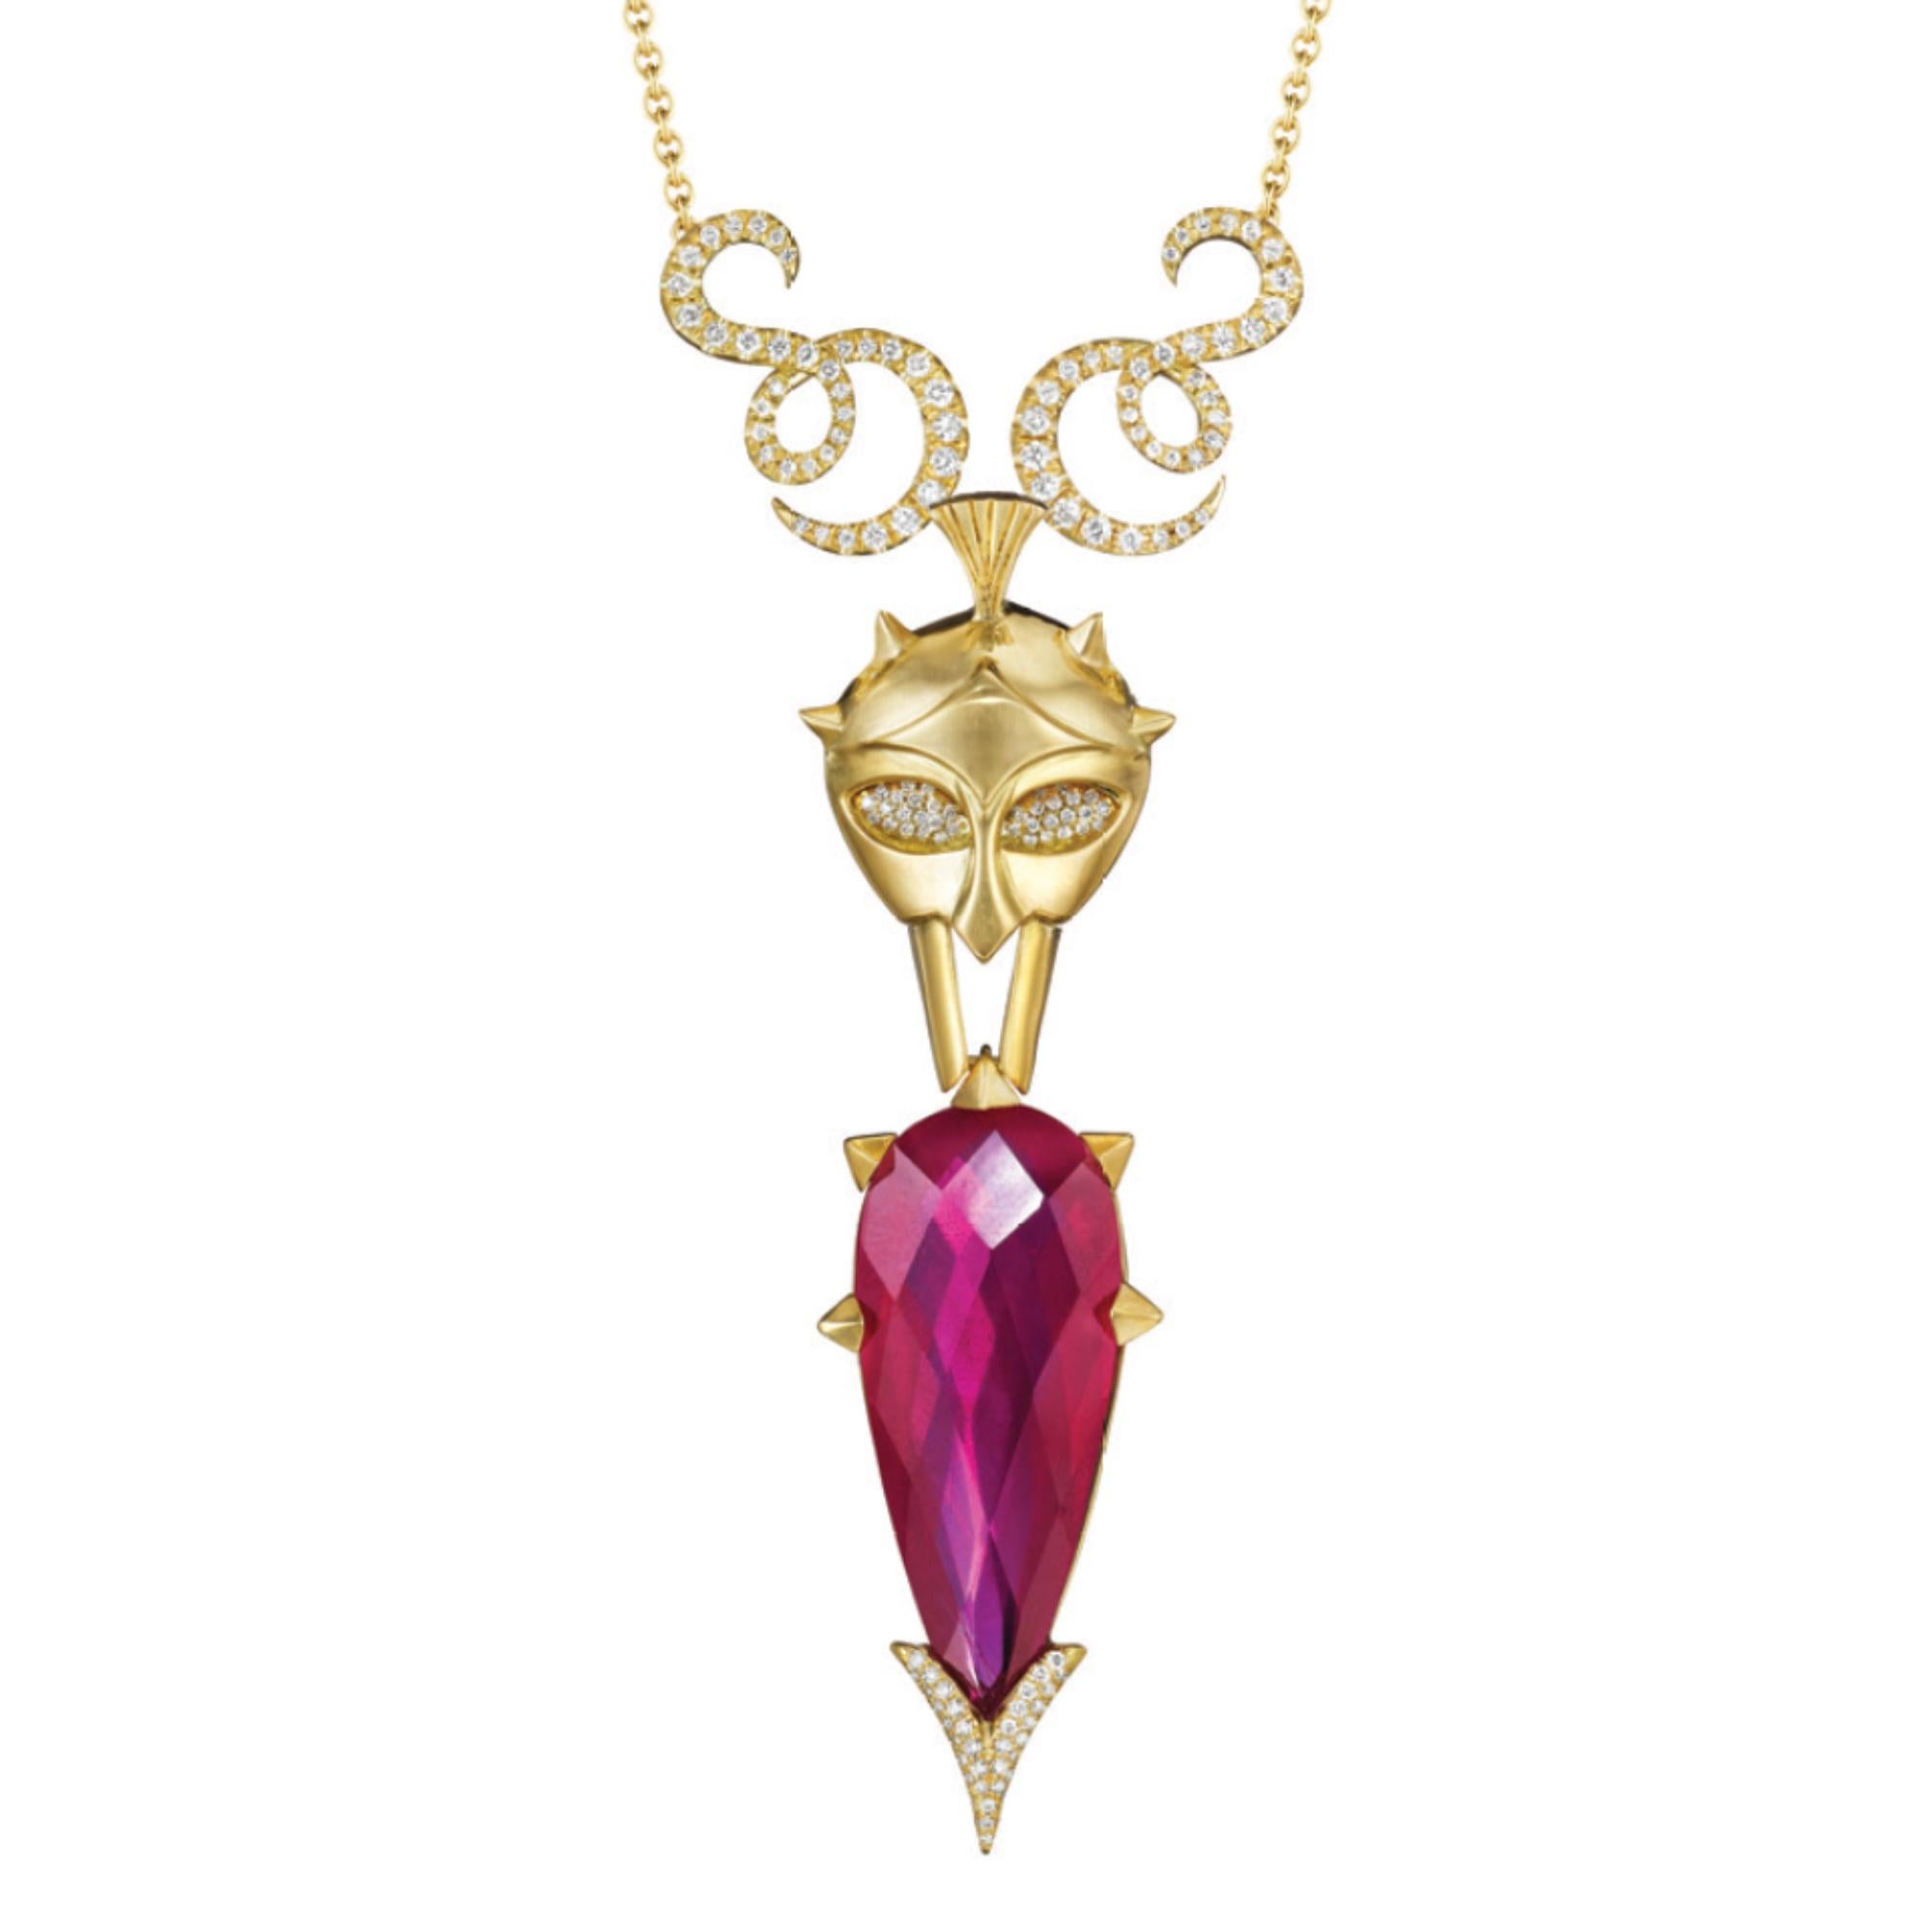 Specs: 18k yellow gold with 32.25 carats of Rhodolite Garnet and .77 carats of Diamond. 

Story: This necklace replicates armor, protection as if going into battle. 

Ares is the god of war, one of the Twelve Olympian gods and the son of Zeus and